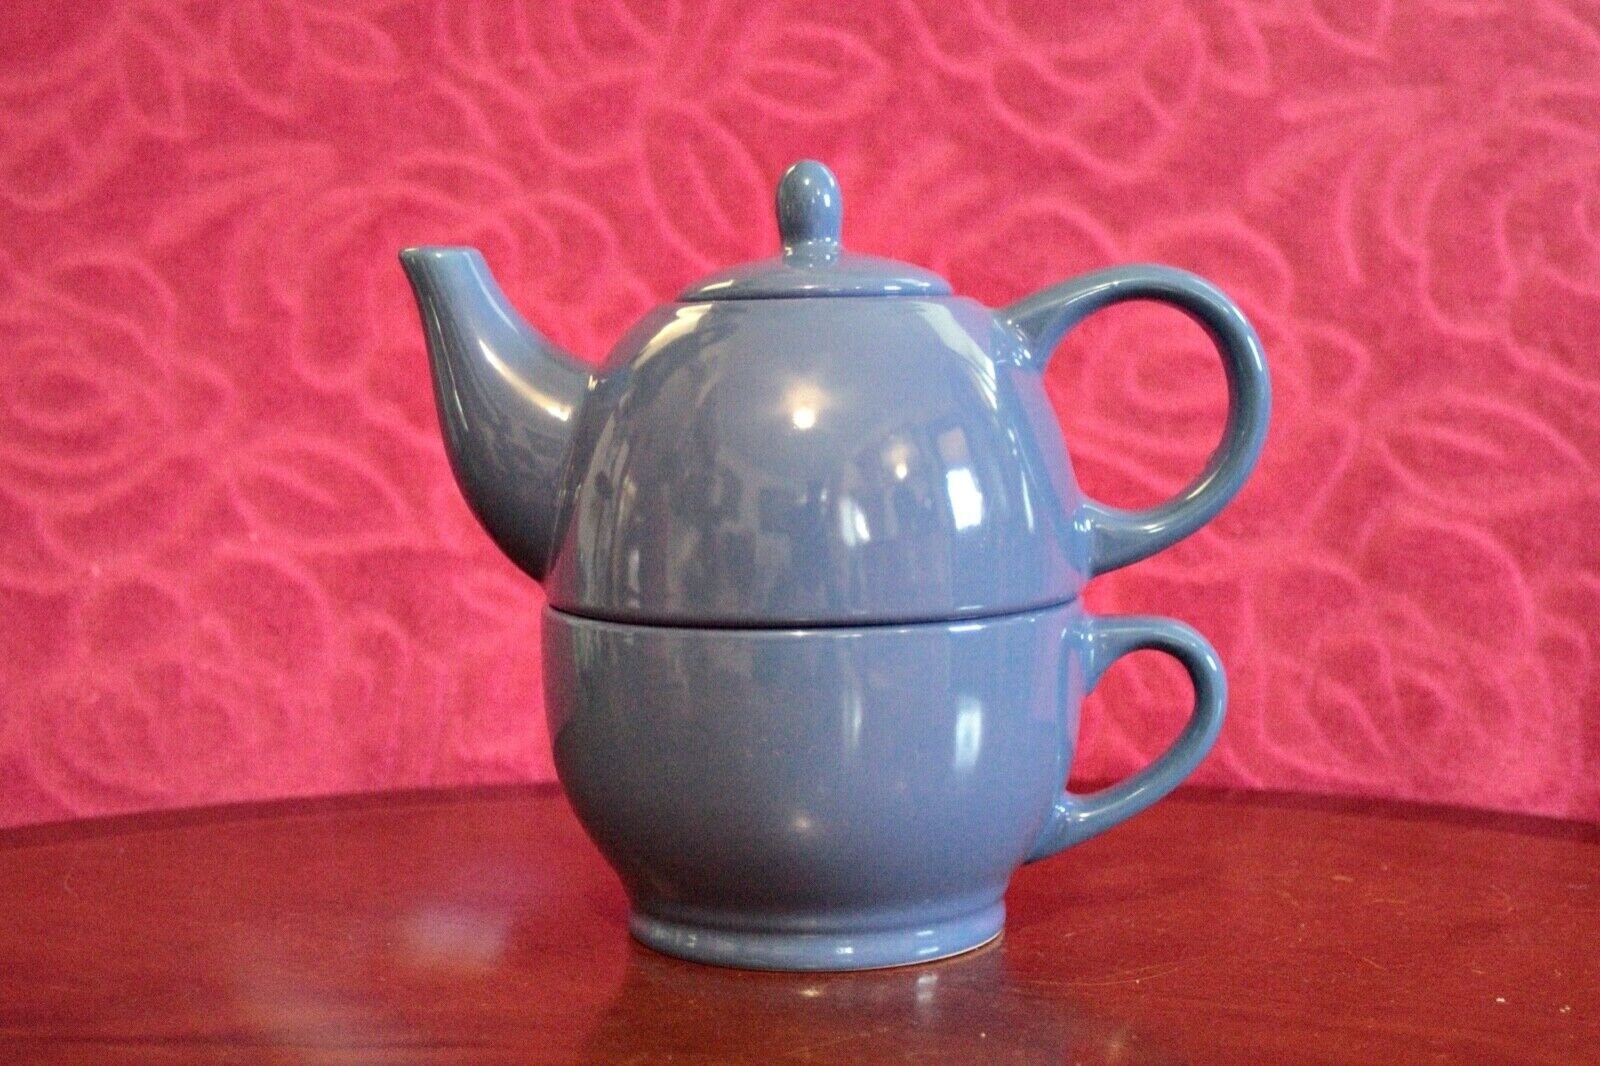 NEW BEAUTIFUL Signature Mariage Frères Porcelain Teapot infuser Small  SINGLE